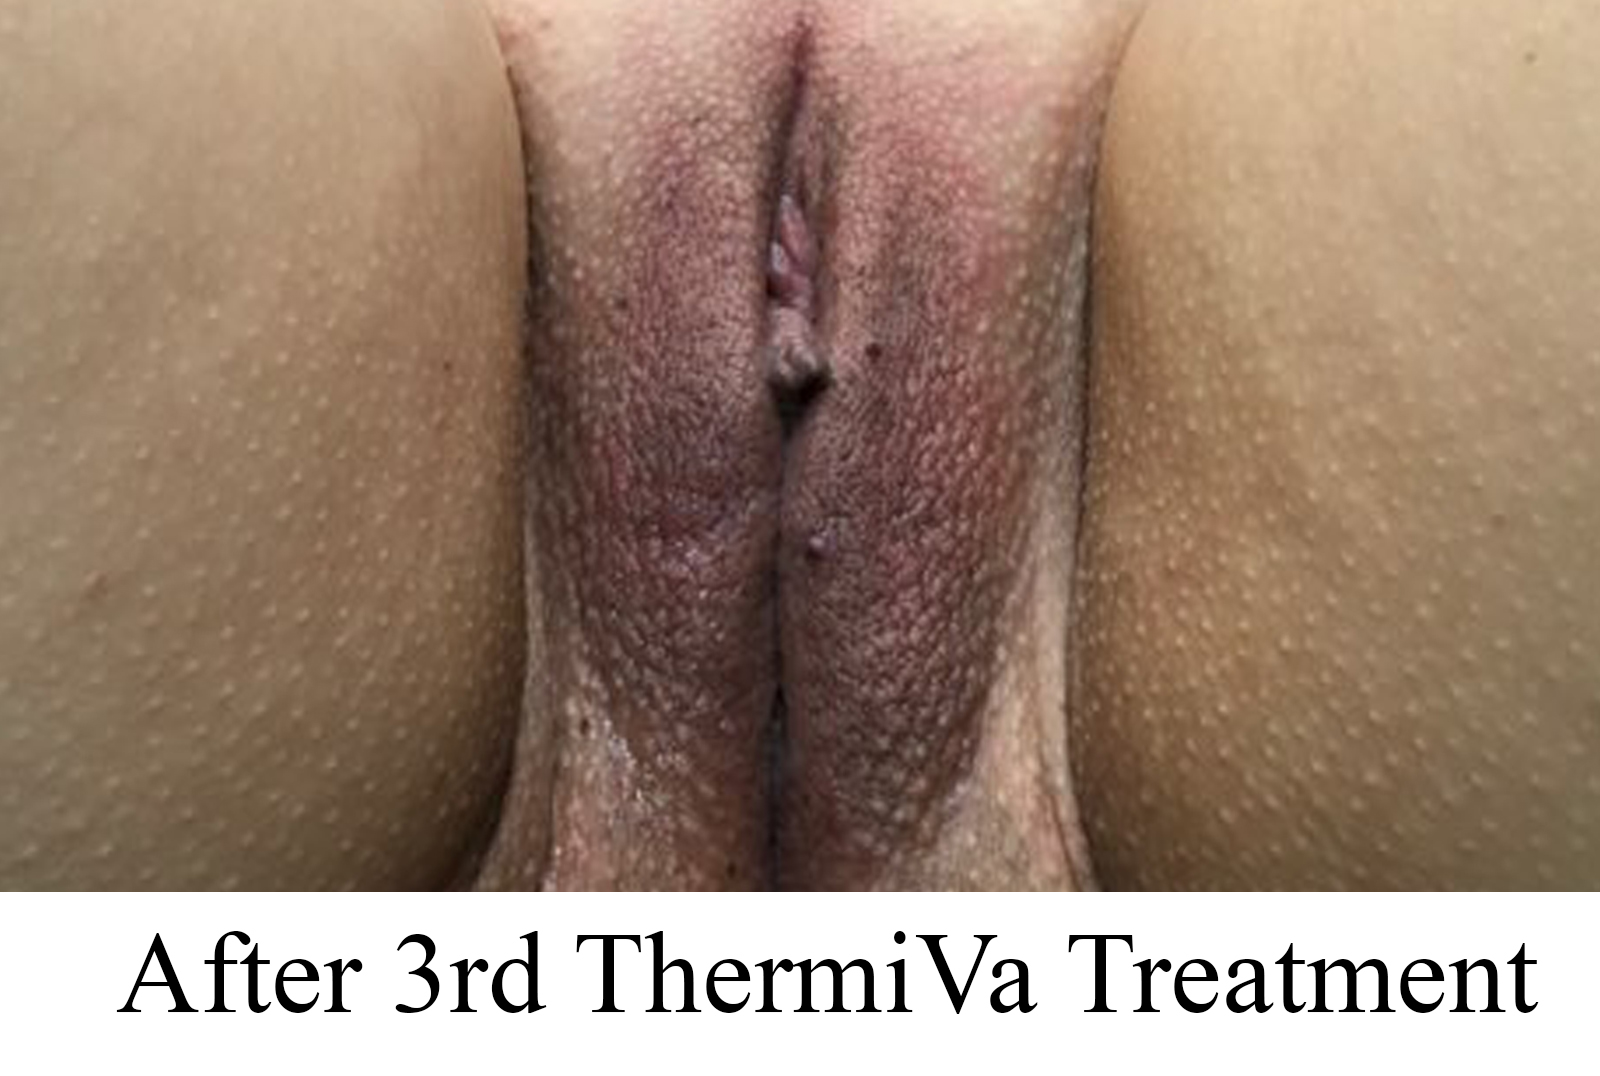 After 3rd ThermiVa Treatment